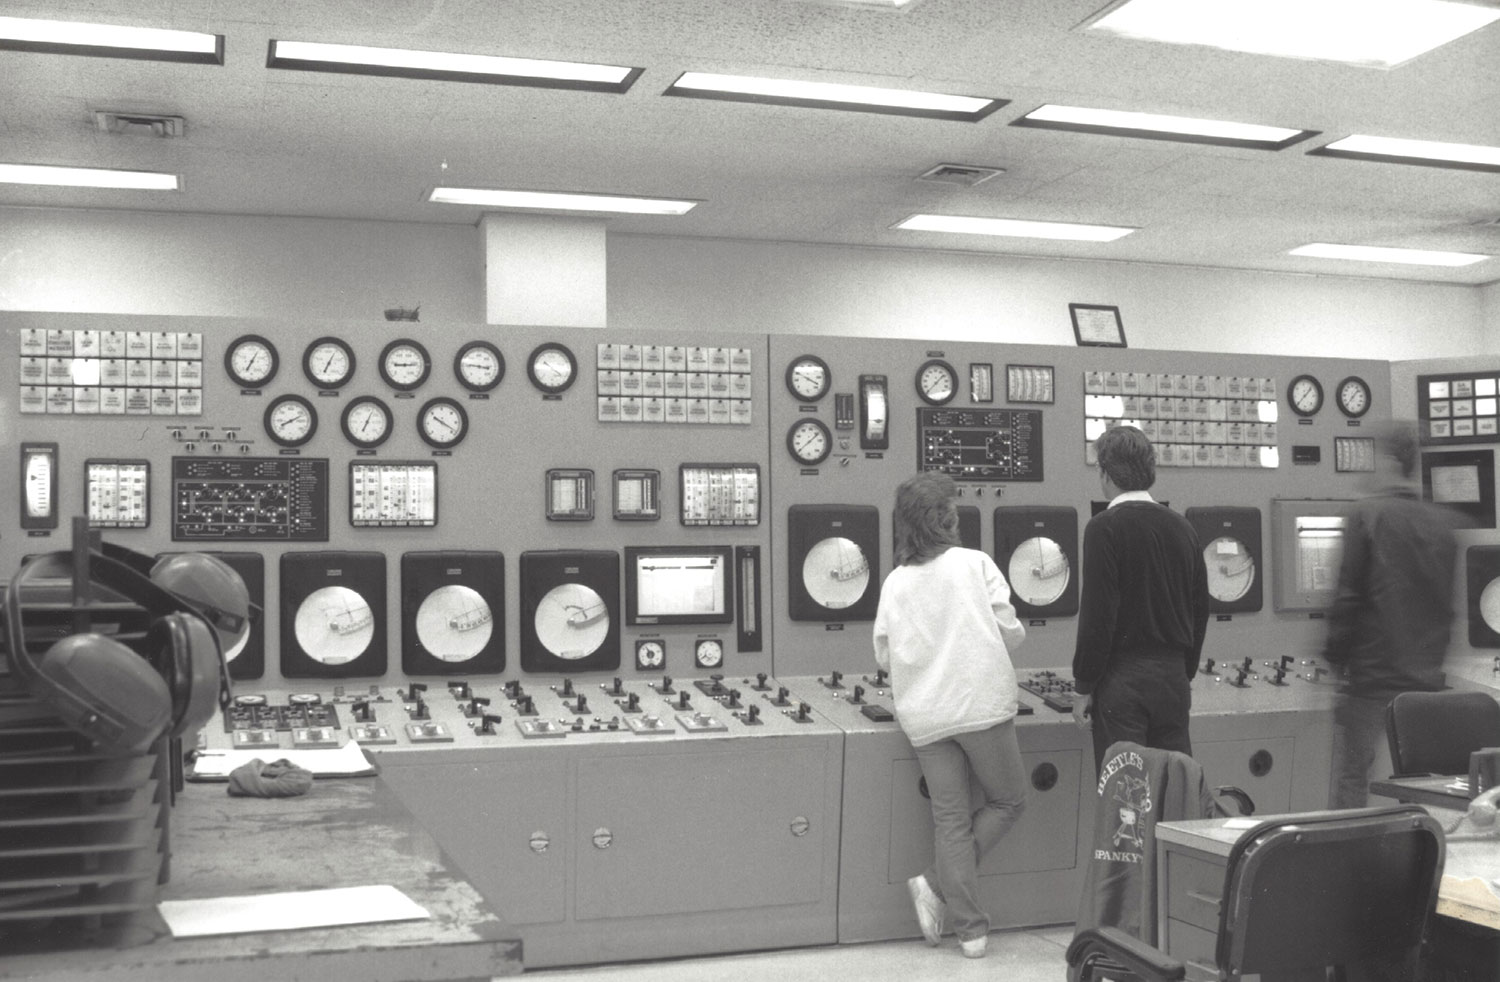 BTU workers monitoring gauges in the 1980s or 1990s.